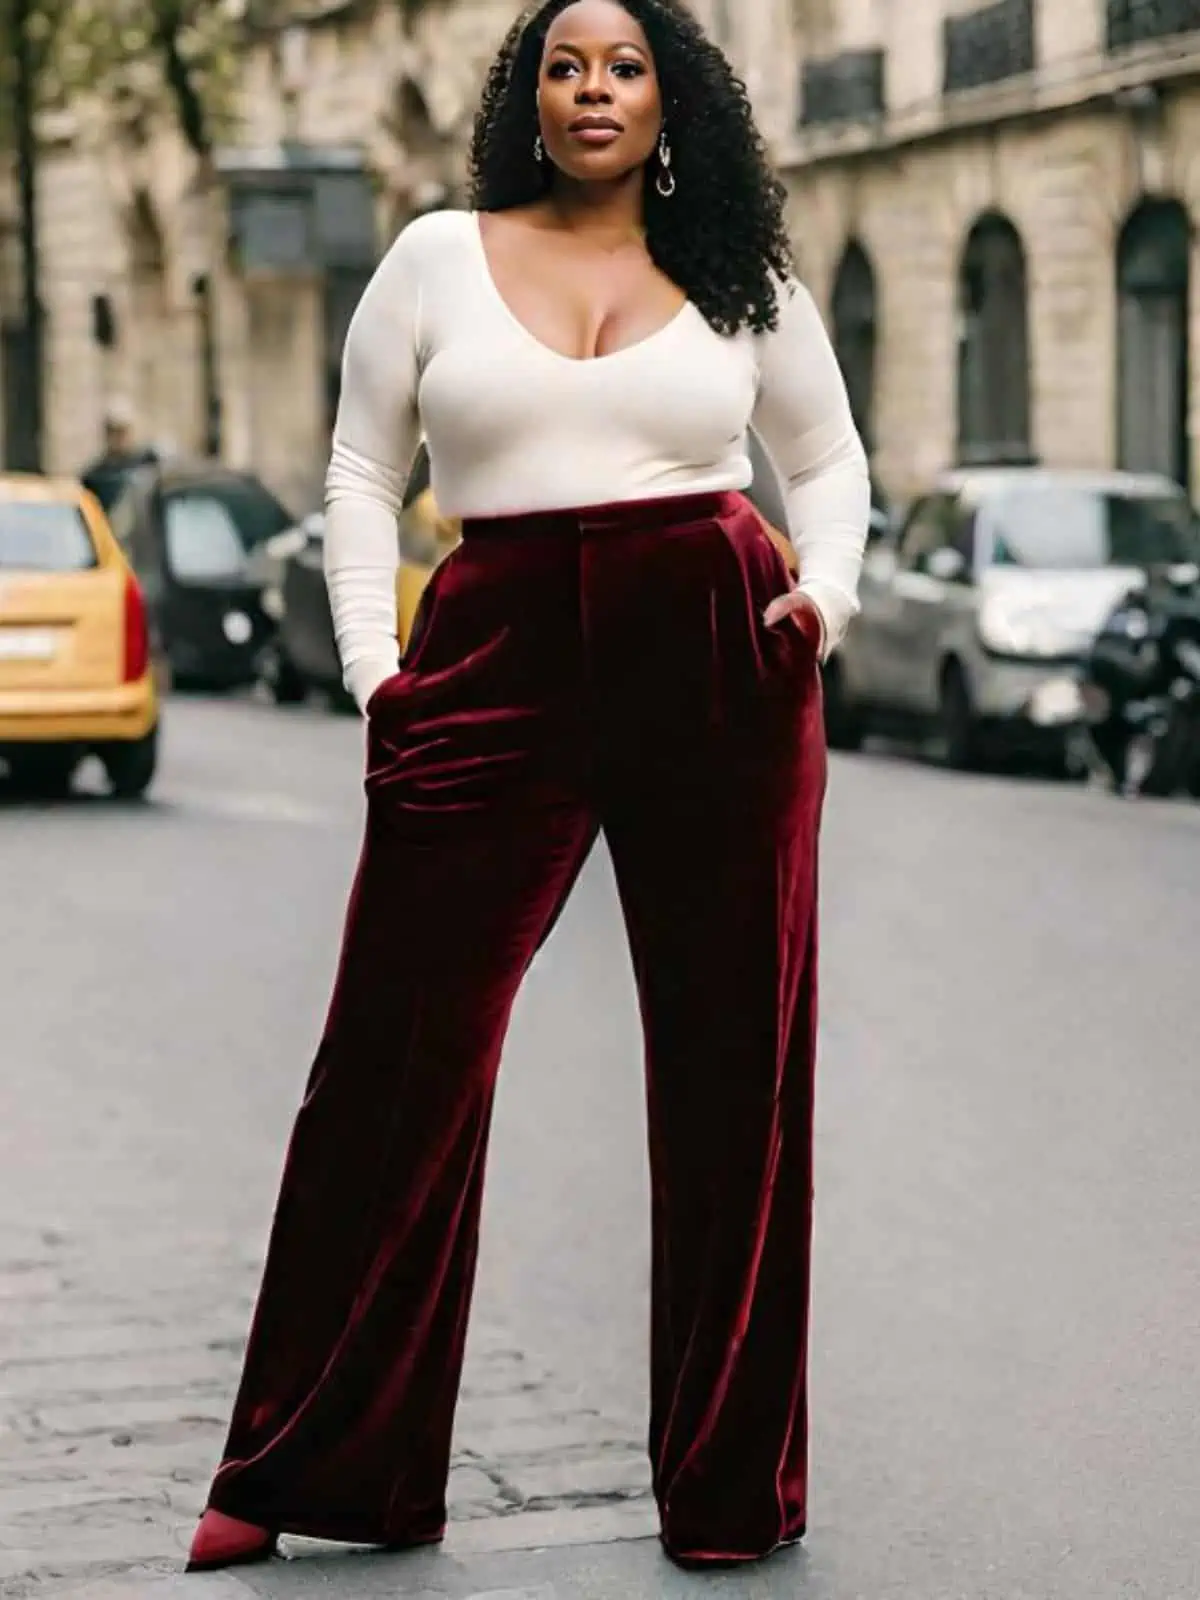 Red Velvet Pants Outfits For Women In Their 20s (2 ideas & outfits